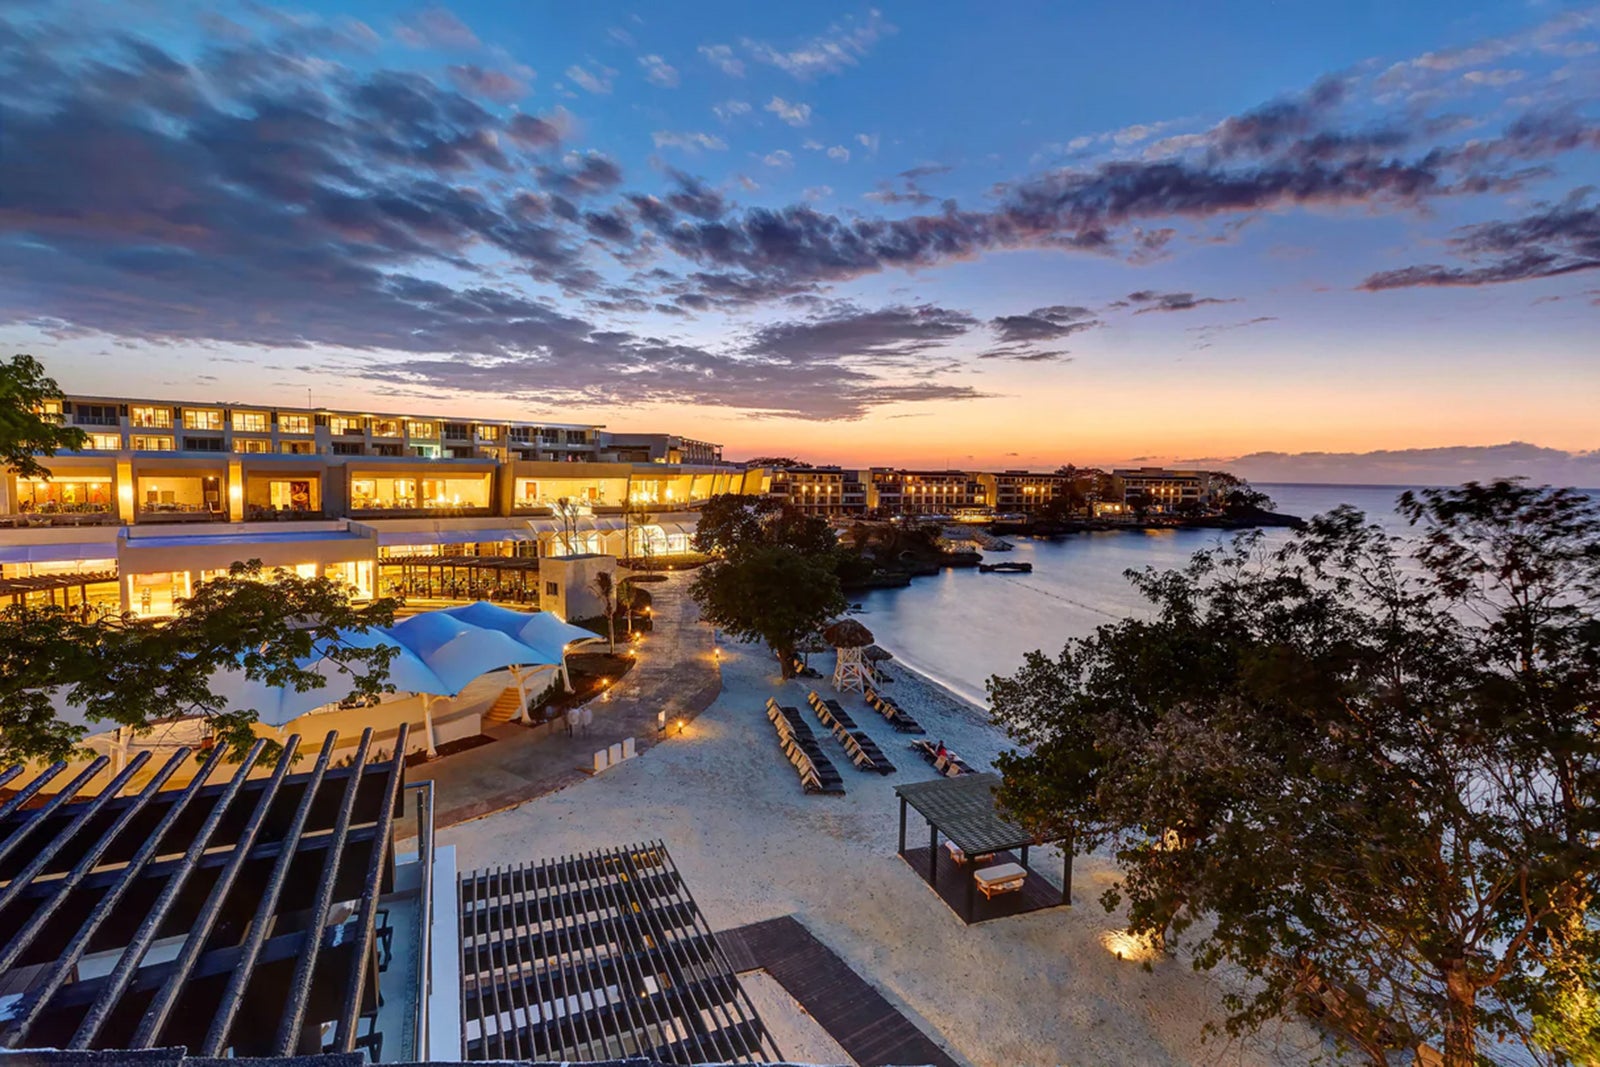 A panoramic view of the Royalton Negril resort in Jamica as the sun sets